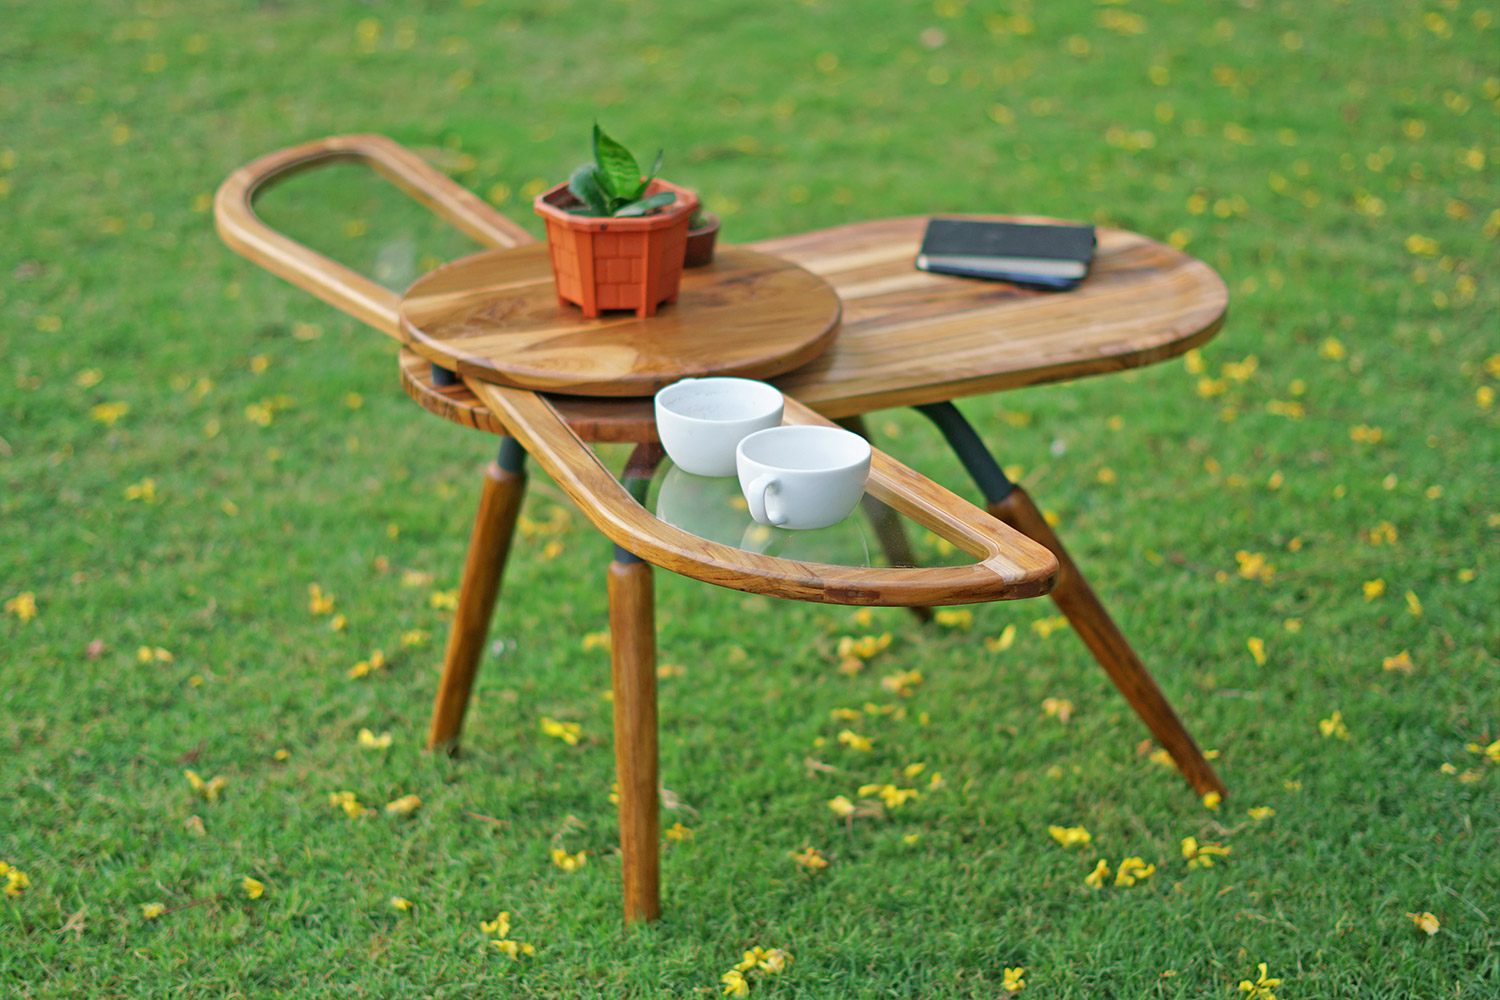 Beetle Inspired Coffee Table Has Wings That Spread Out To Increase Surface Area - Elytra extending coffee table